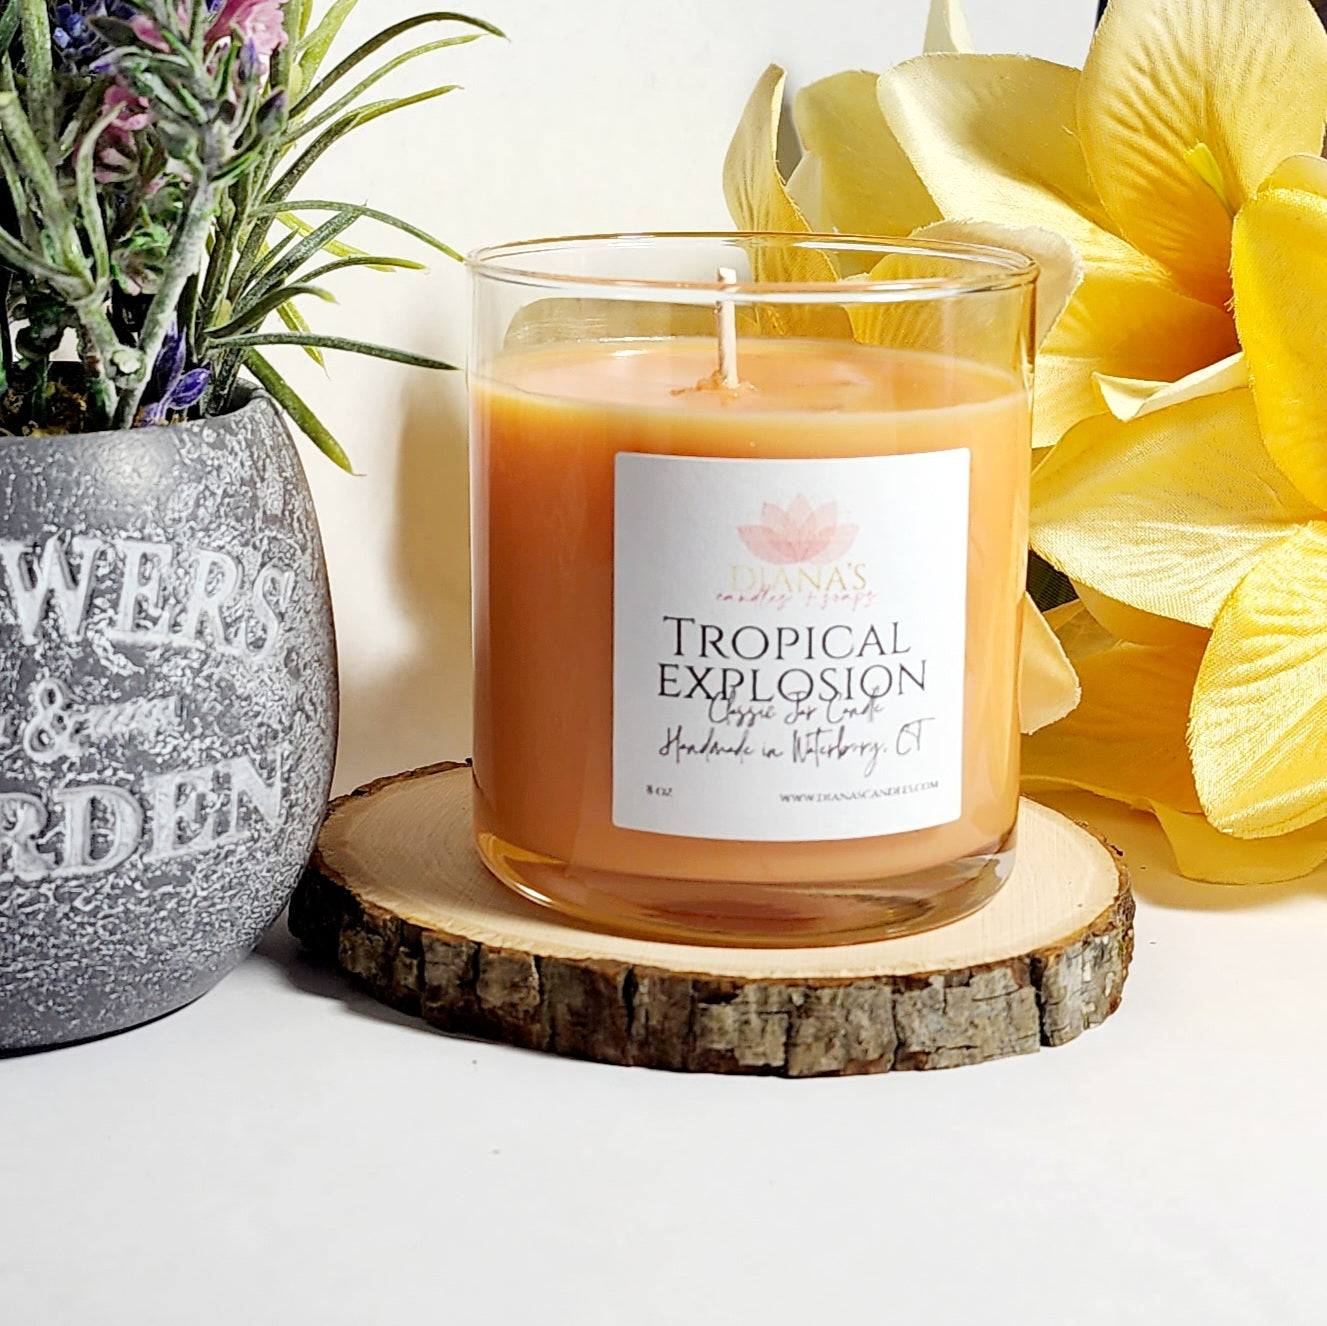 Tropical Explosion Candle - Diana's Candles and Soaps 